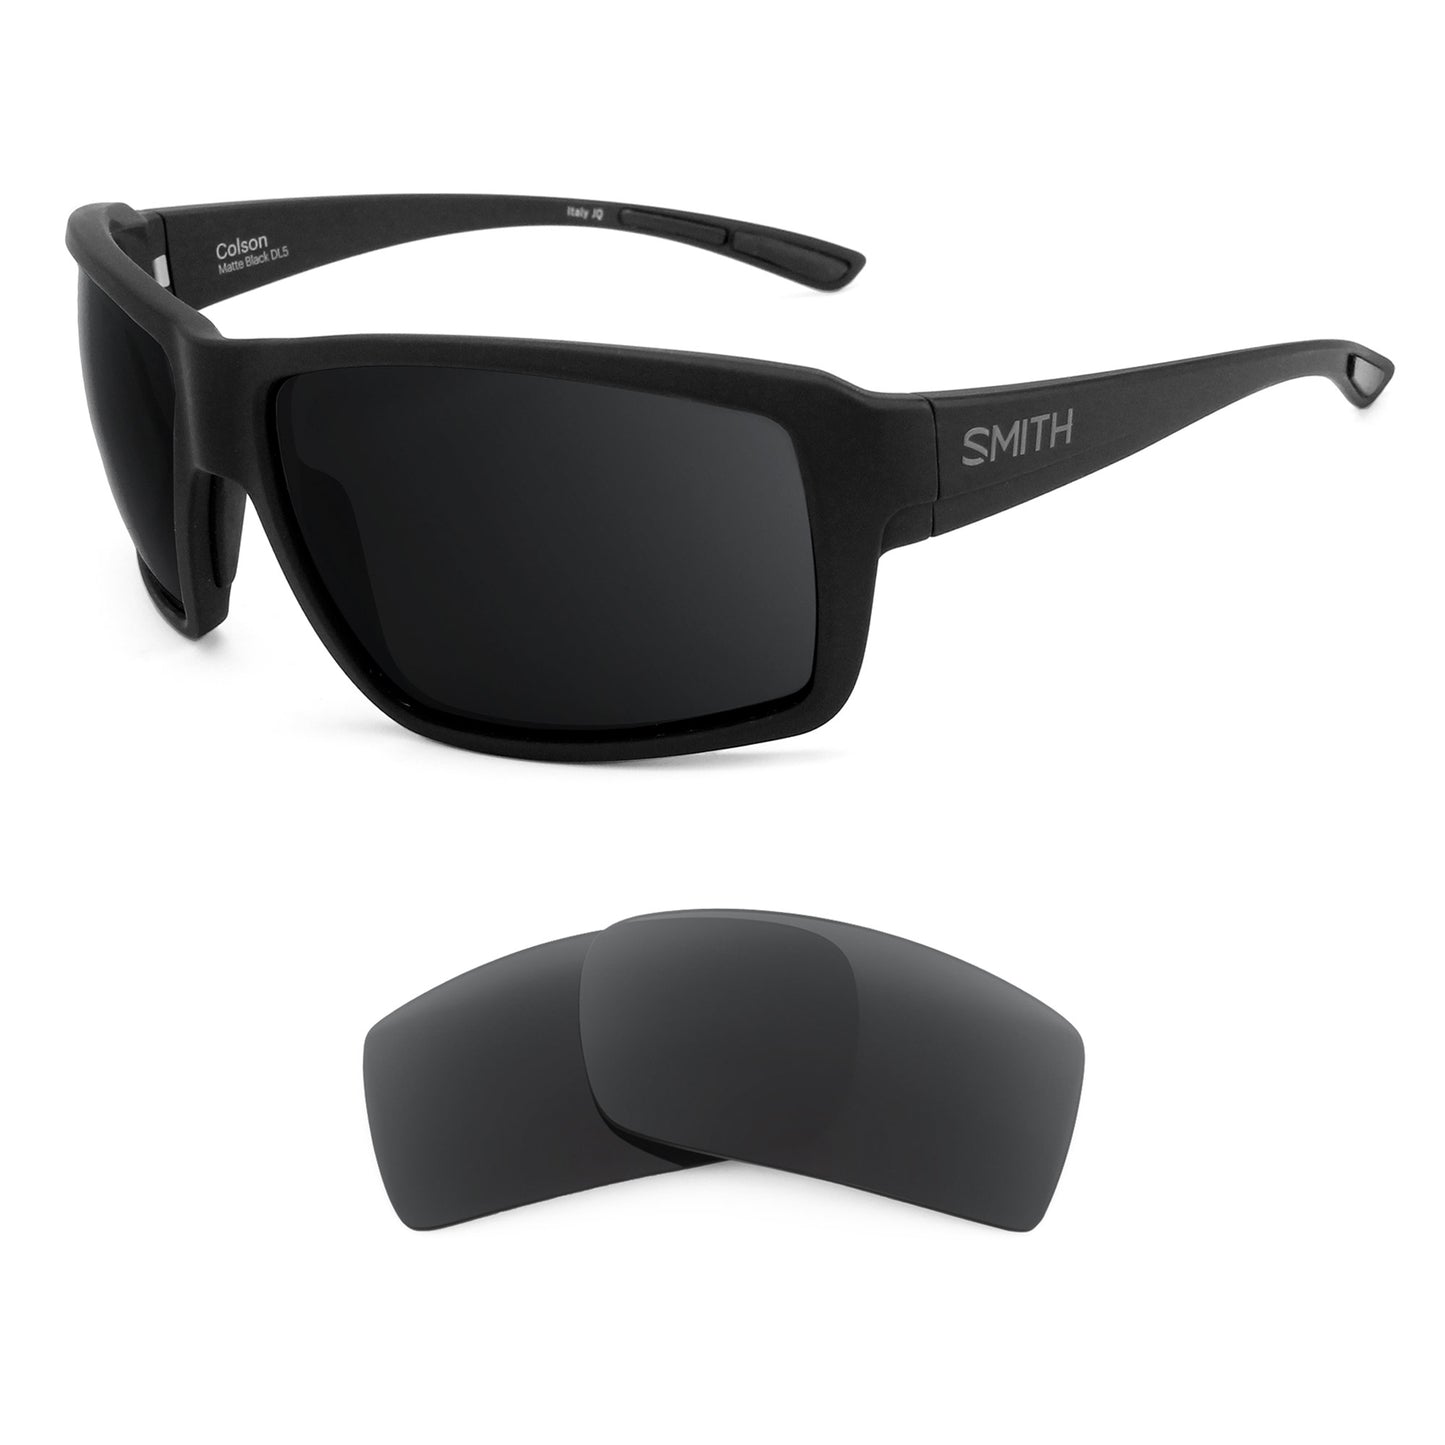 Smith Colson sunglasses with replacement lenses